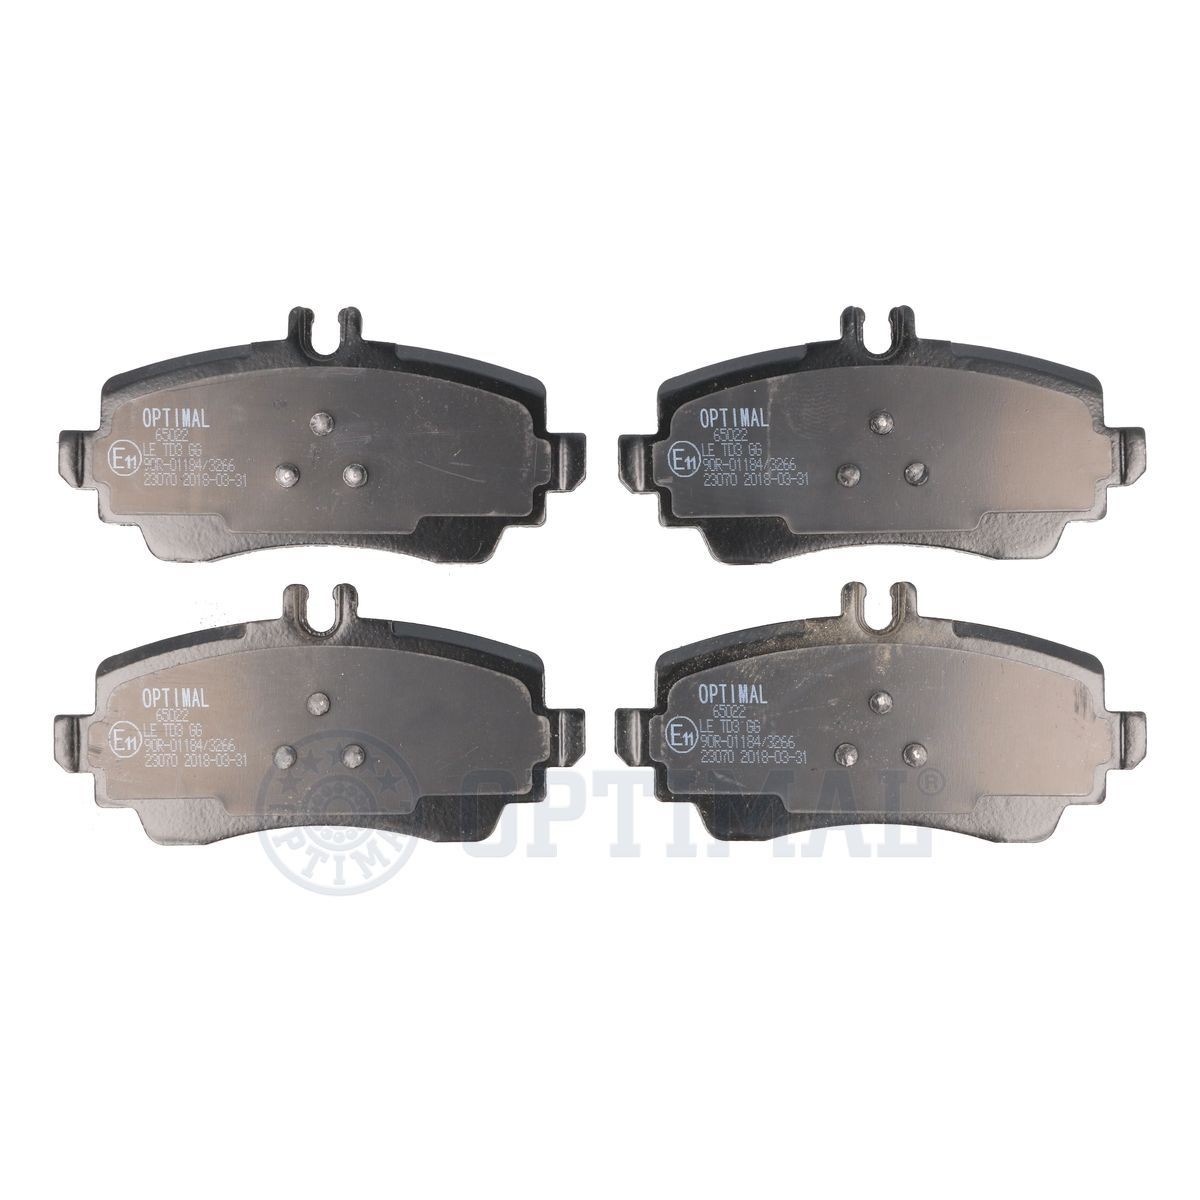 OPTIMAL BP-65022 Brake pad set Front Axle, prepared for wear indicator, excl. wear warning contact